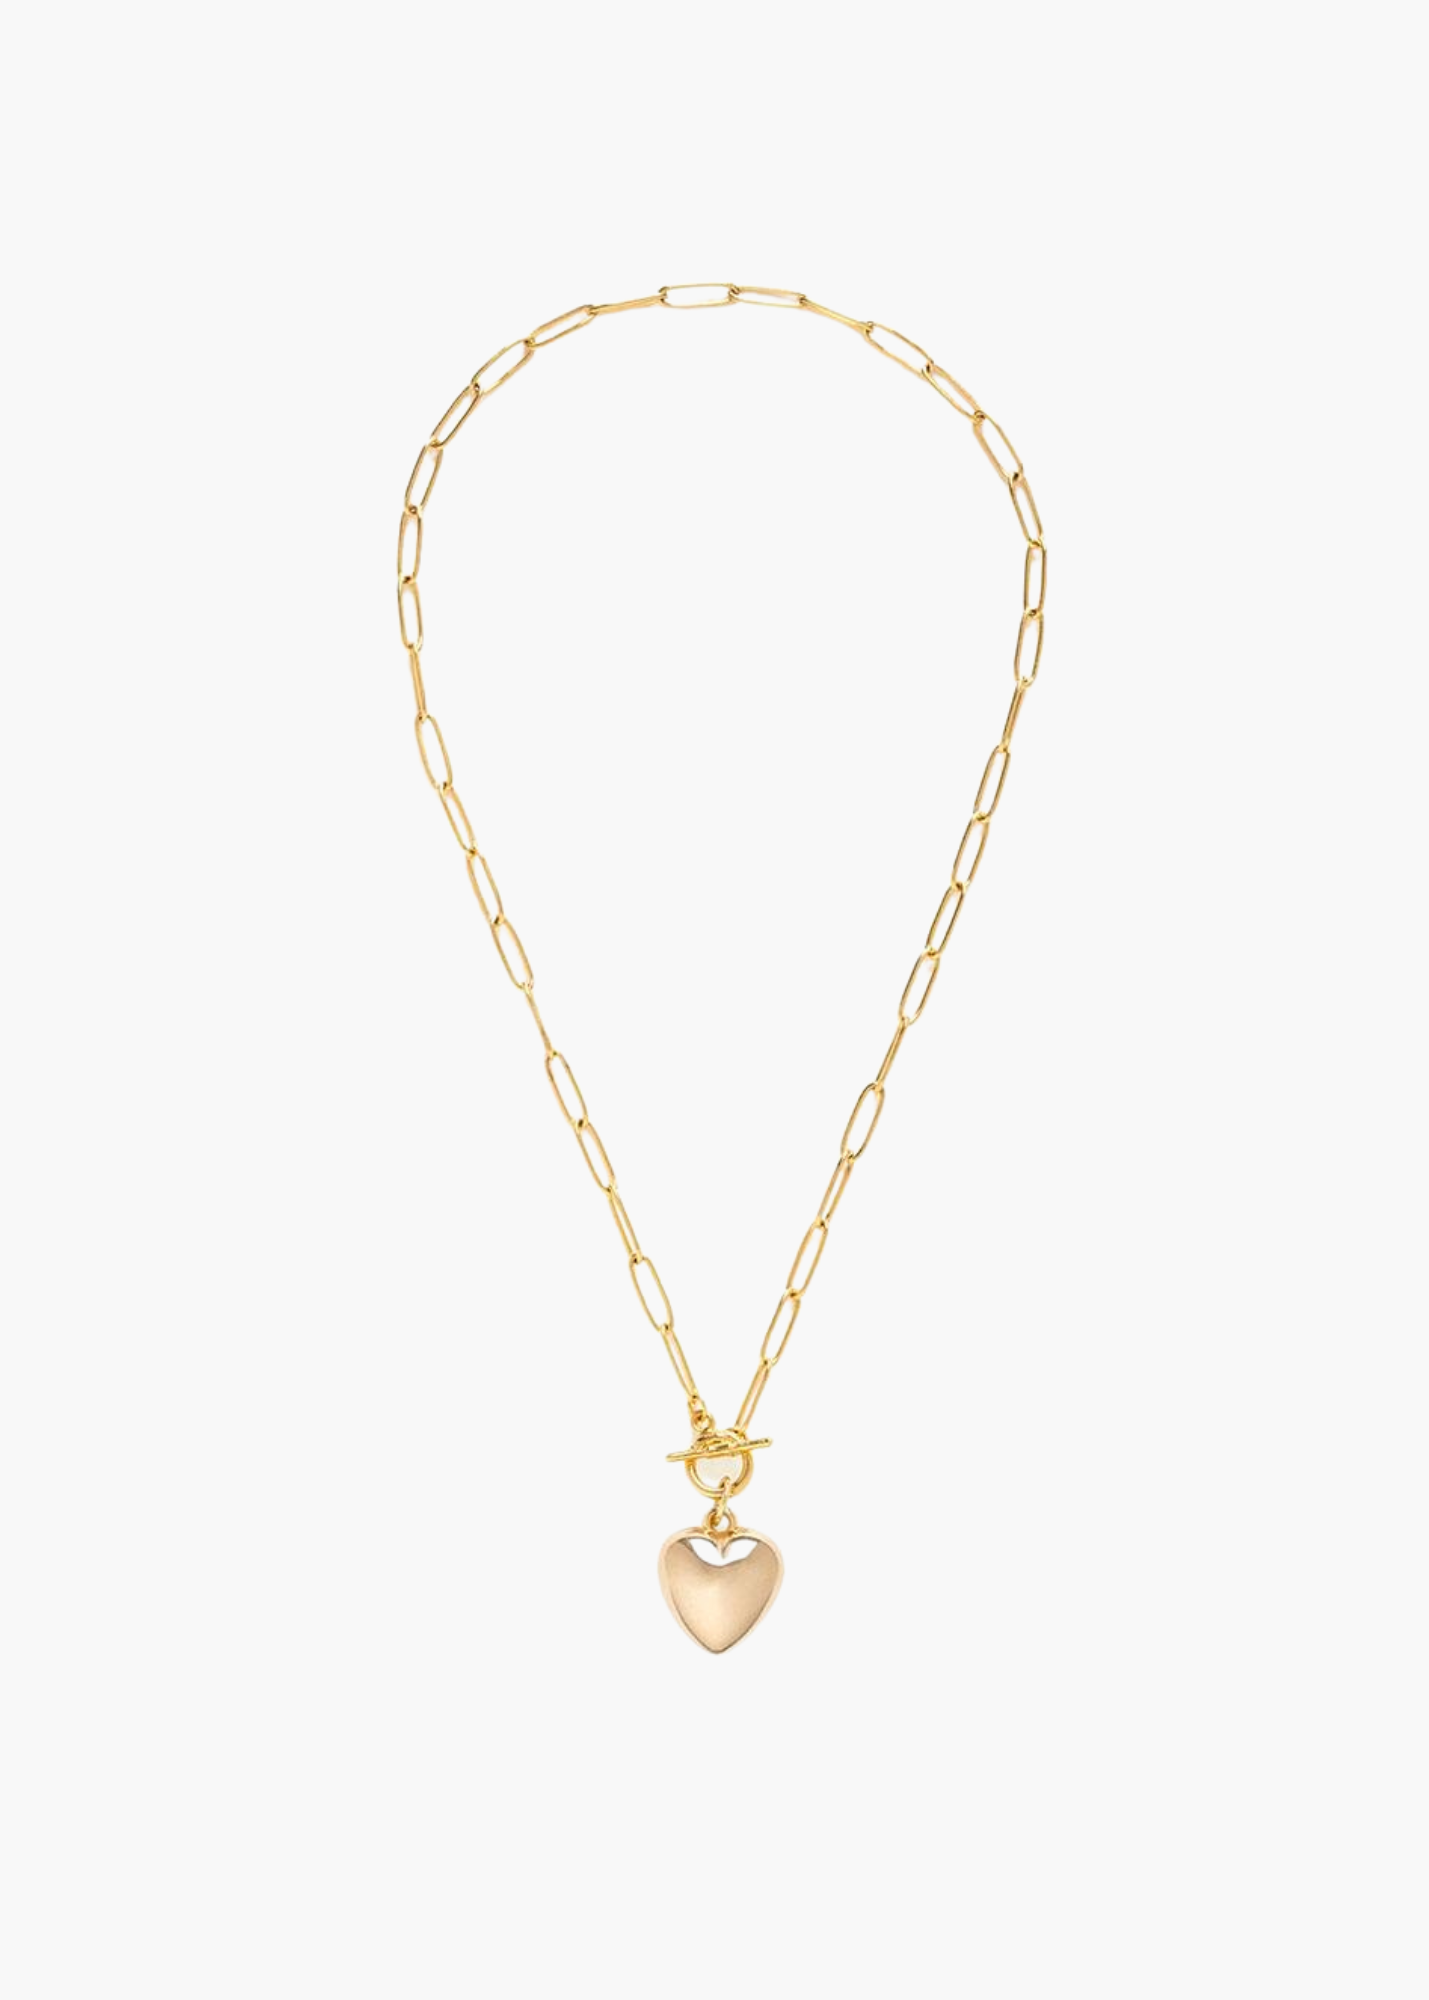 Puffy Gold Heart Toggle Necklace